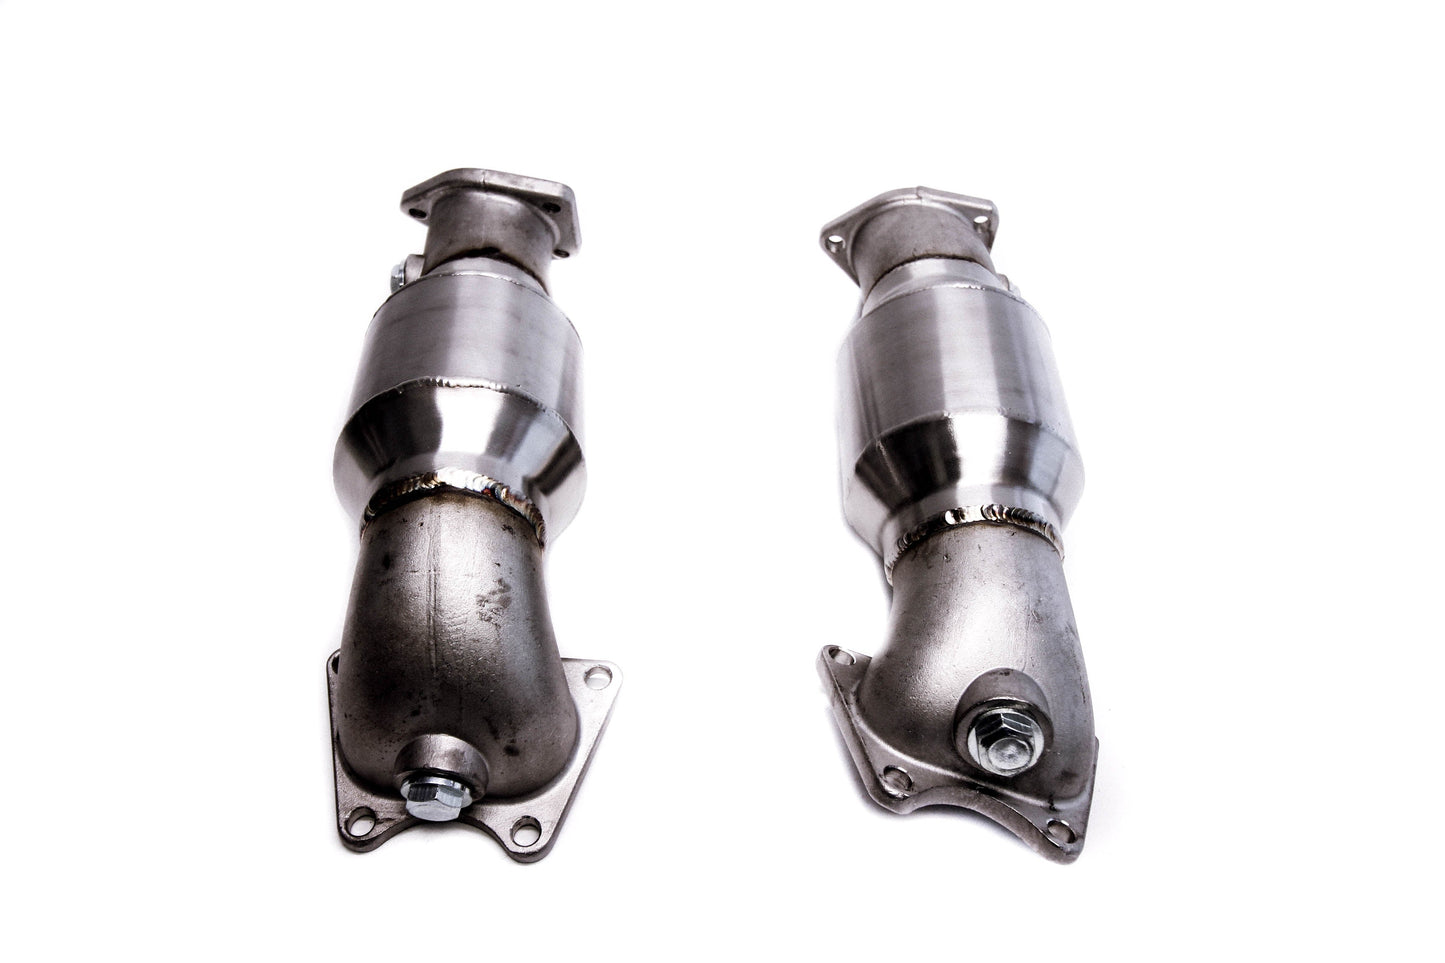 PLM - Performance Primary Catalytic Converters For Acura TL 2004 - 2008